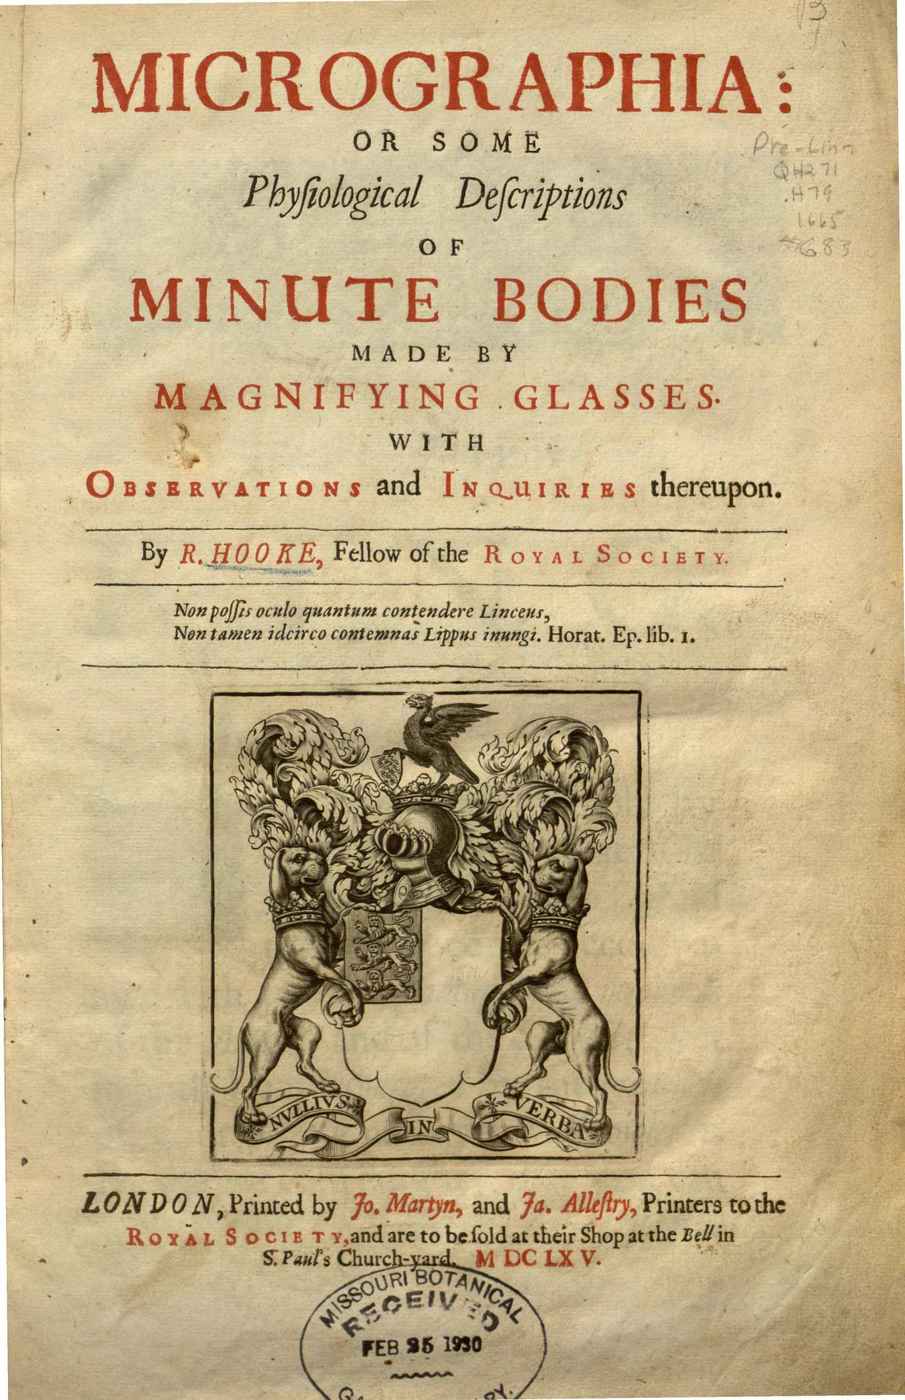 Cover of Robert Hooke’s Micrographia (1666); fairly conventional book example, but interesting for its relatively systematic use of rubrication on cover to emphasize key nouns.